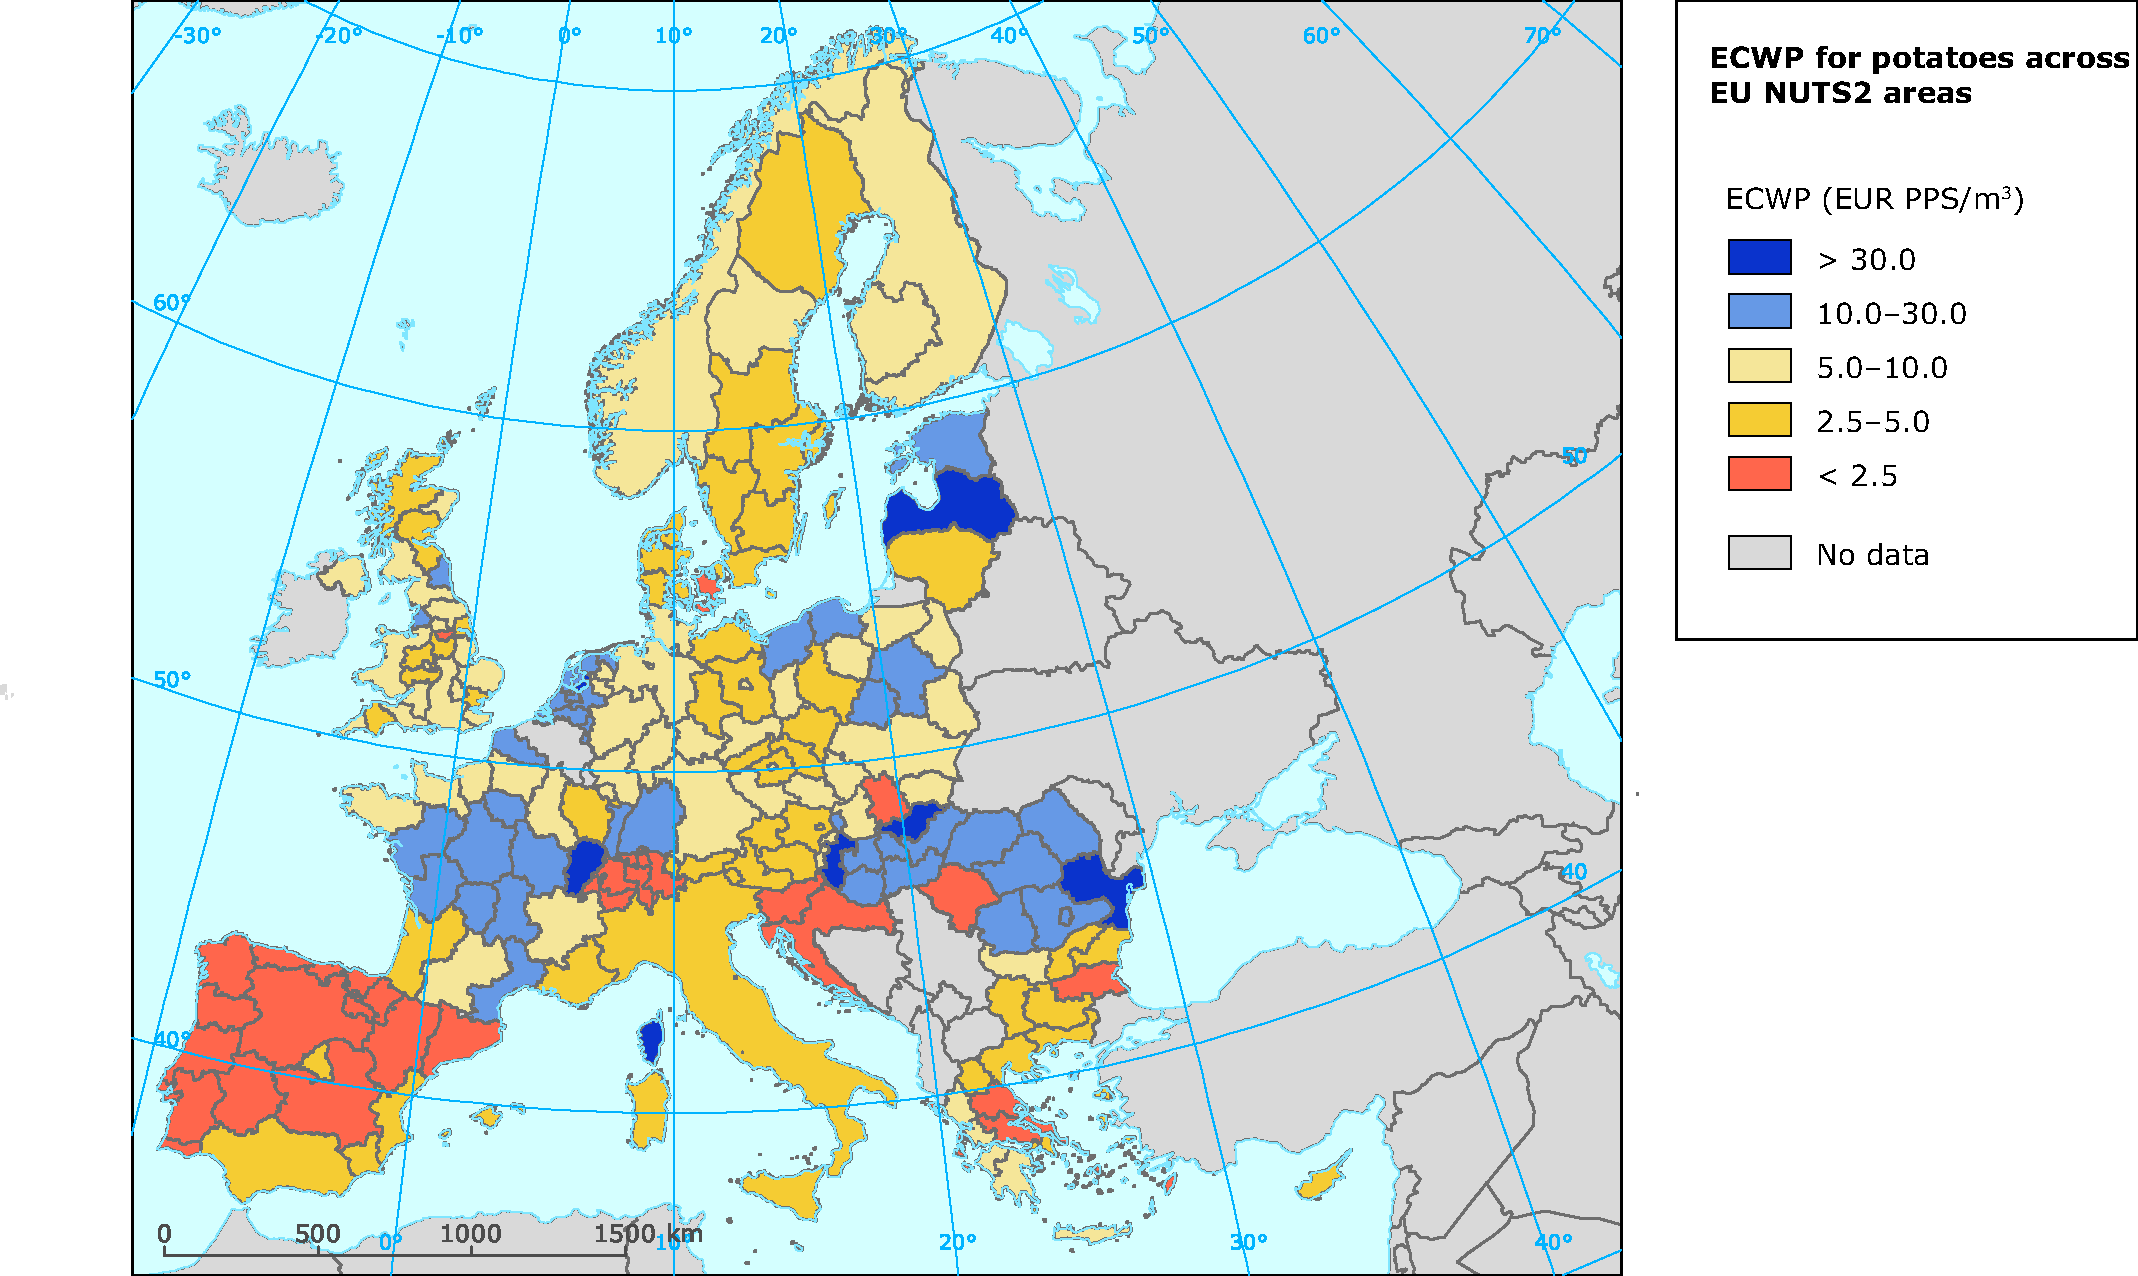 ECWP (in € PPS/m3) potatoes across EU NUTS2 areas